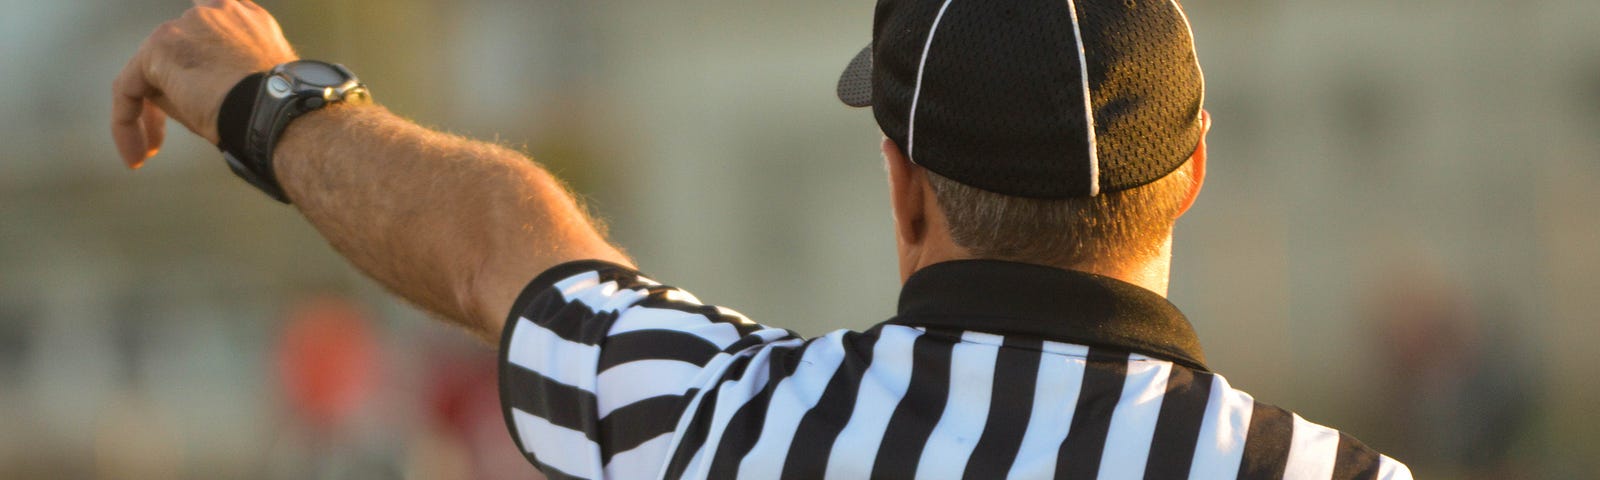 The back of a chief referee with finger pointing out into the distance as if calling the play.